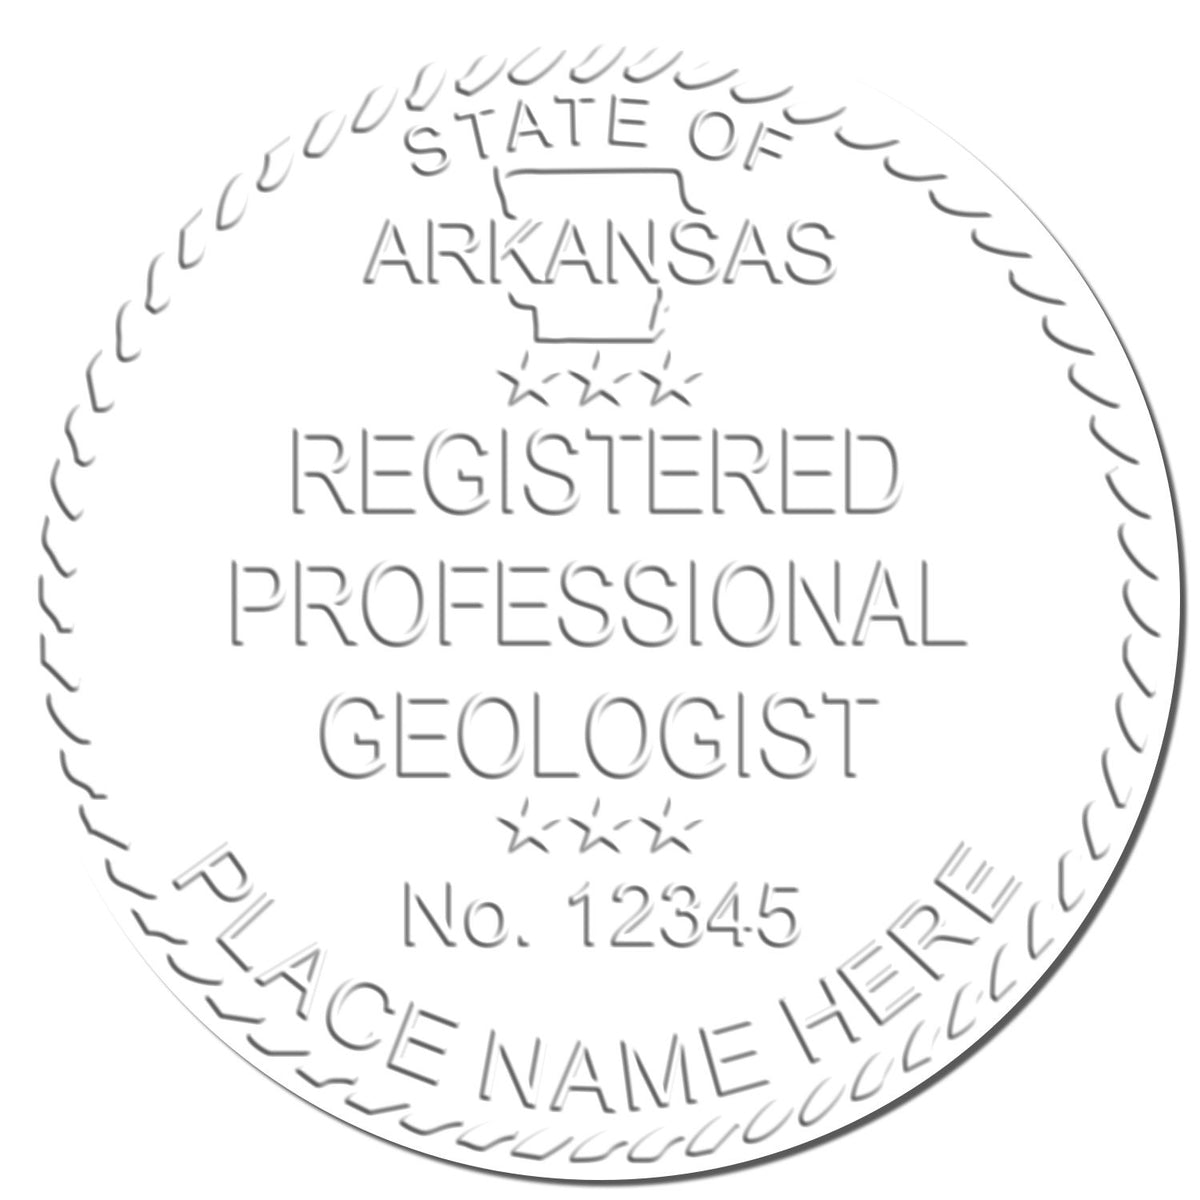 This paper is stamped with a sample imprint of the Handheld Arkansas Professional Geologist Embosser, signifying its quality and reliability.